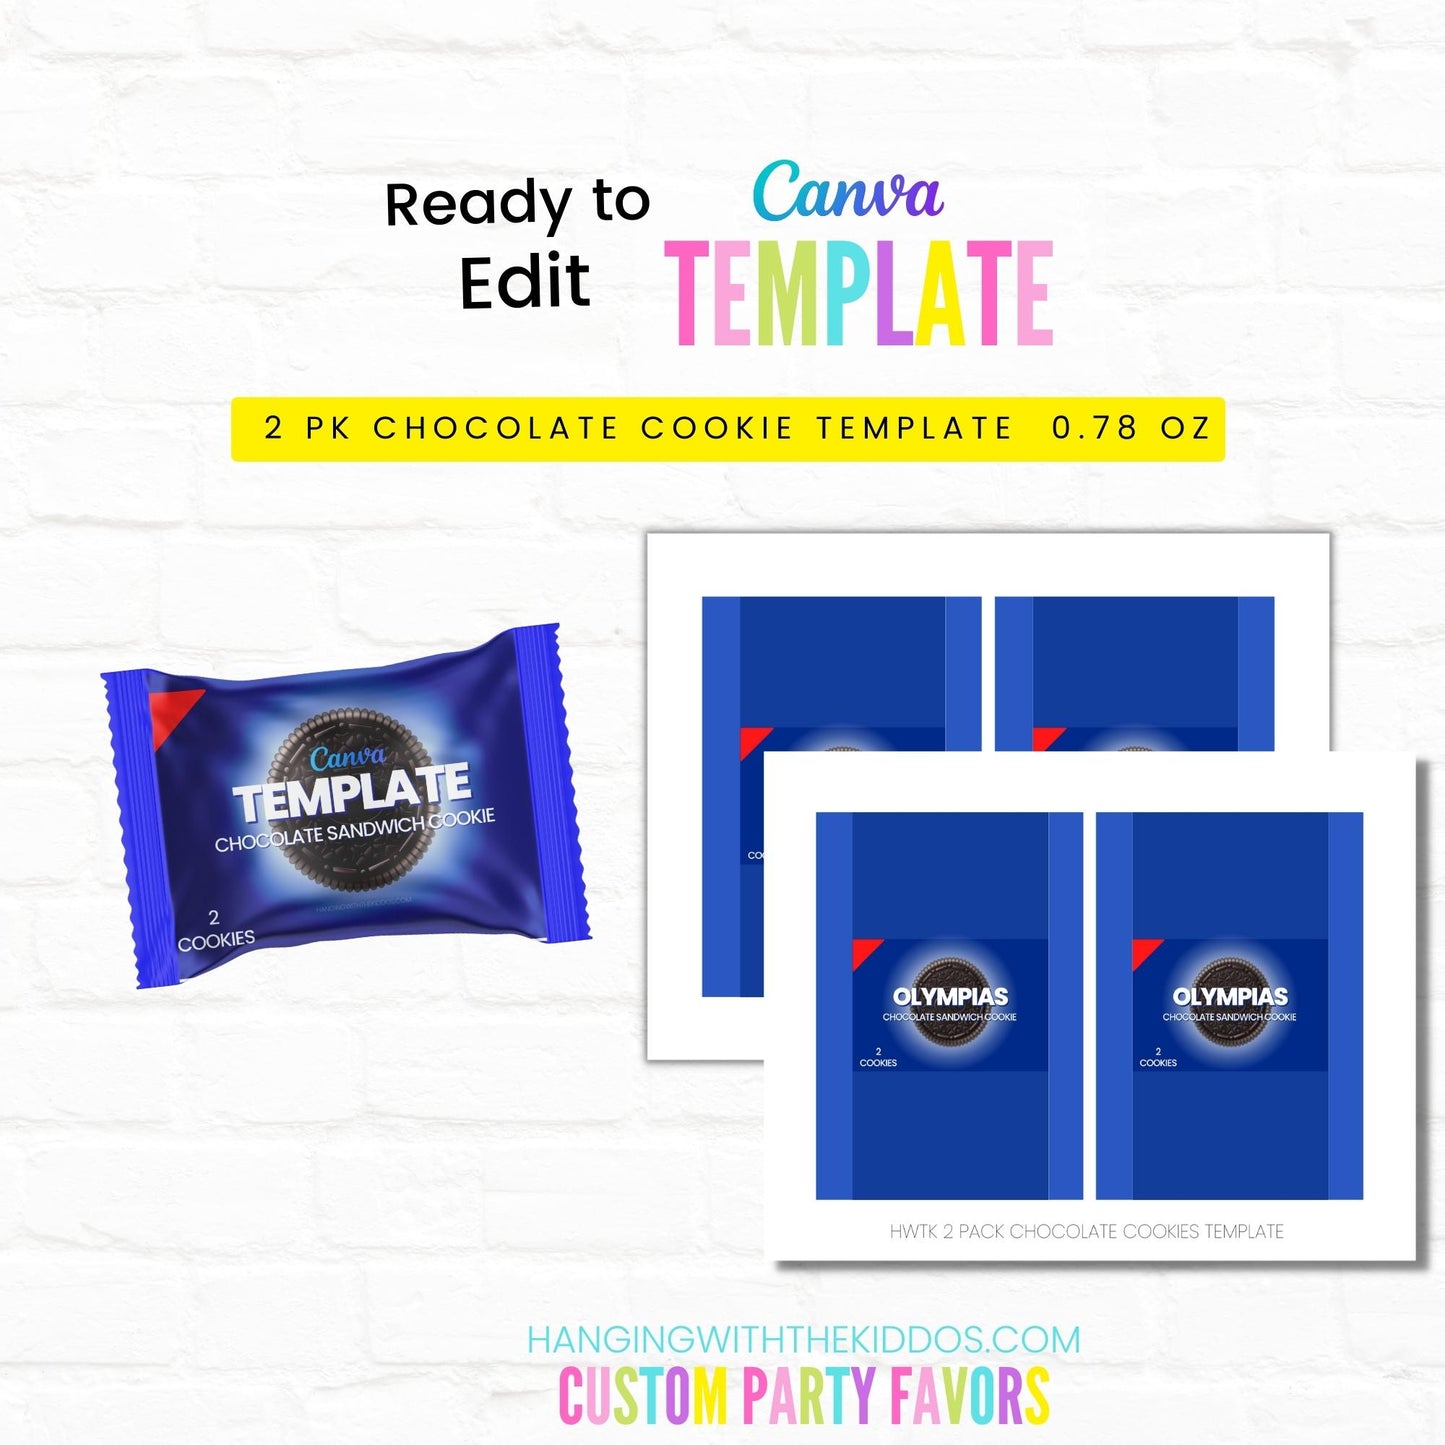 2 PK CHOCOLATE COOKIE WRAPPER TEMPLATE